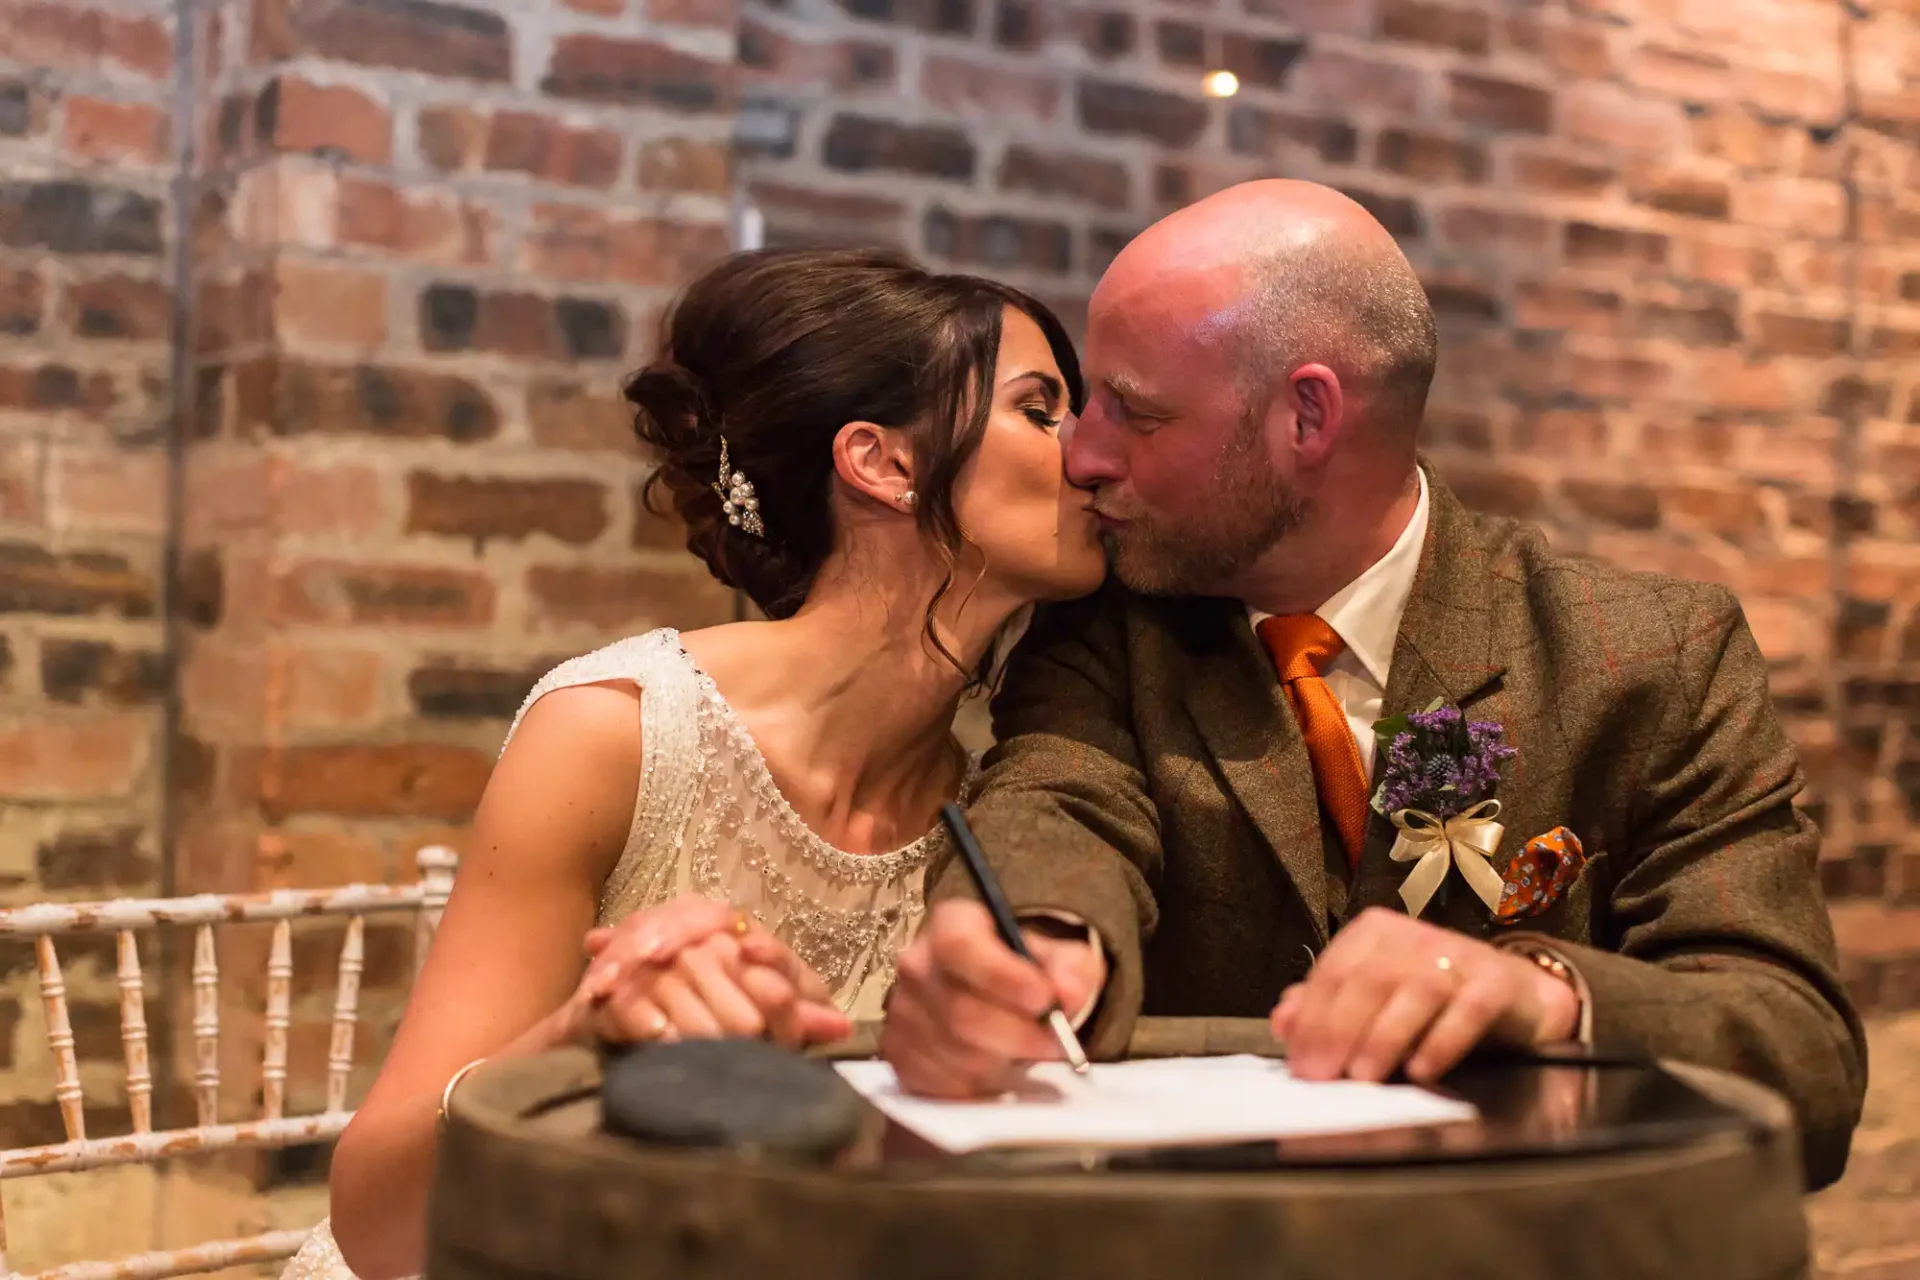 A bride and groom kiss while signing their marriage certificate at a table, in a warmly lit room with brick walls.